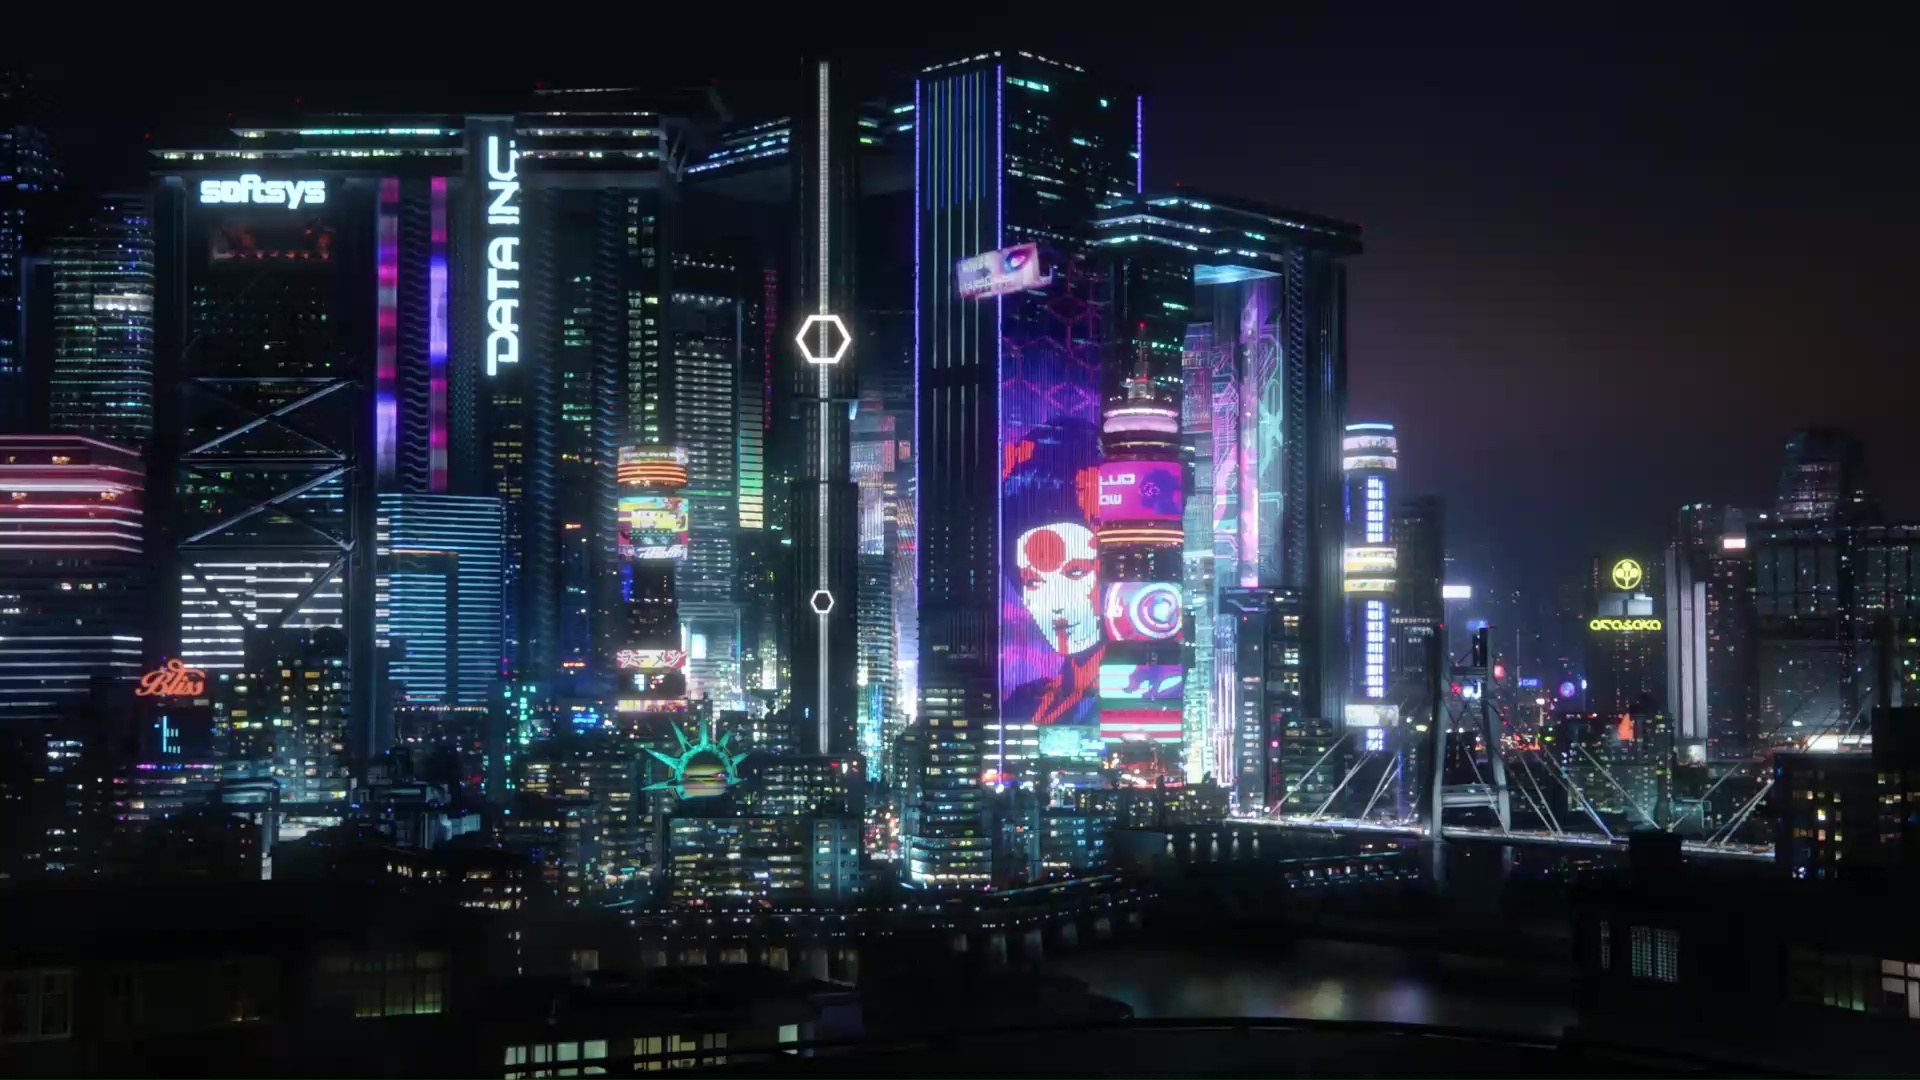 I've gathered some of the best Cyberpunk live wallpapers for your desktop